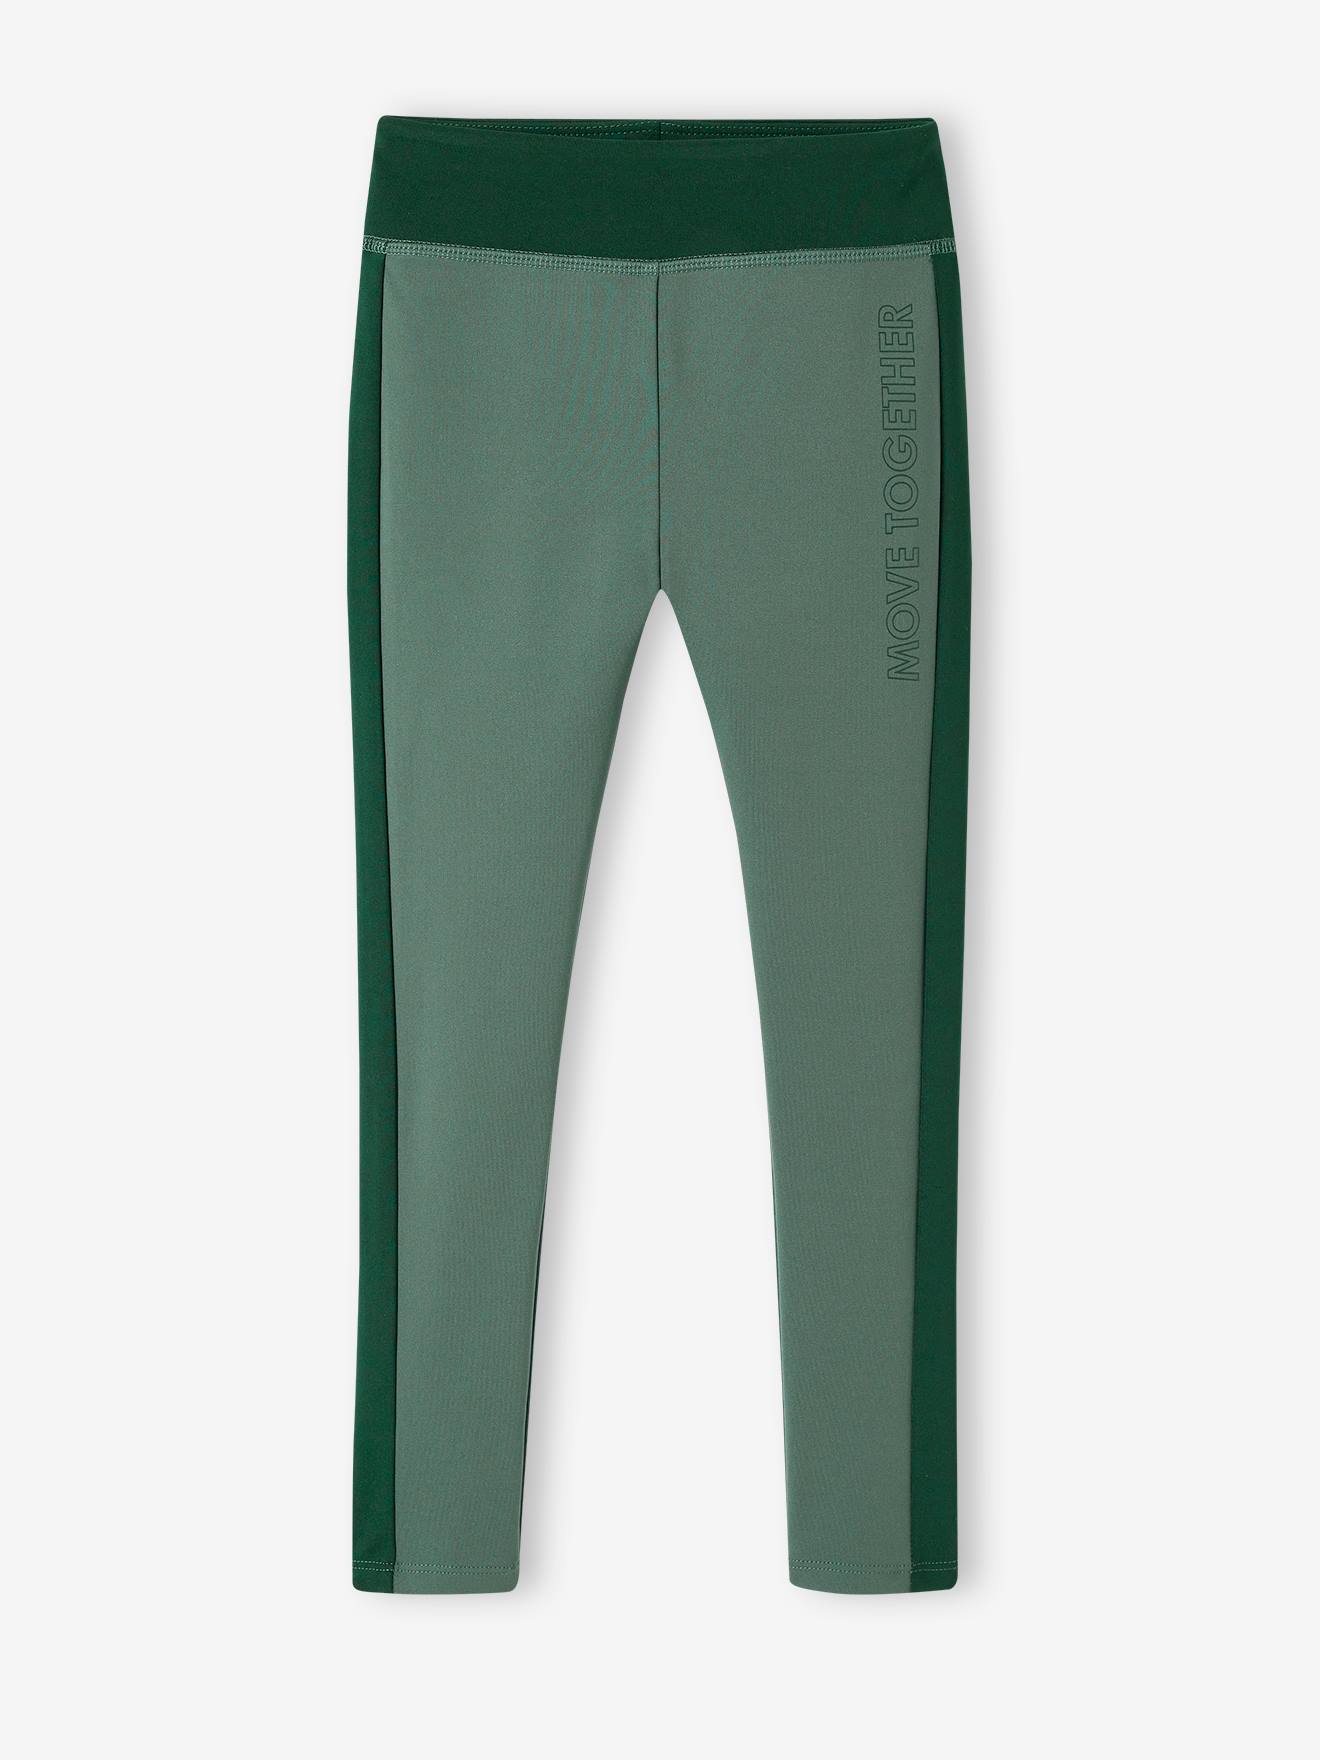 Sports Leggings with Stripe Down the Sides, for Girls green